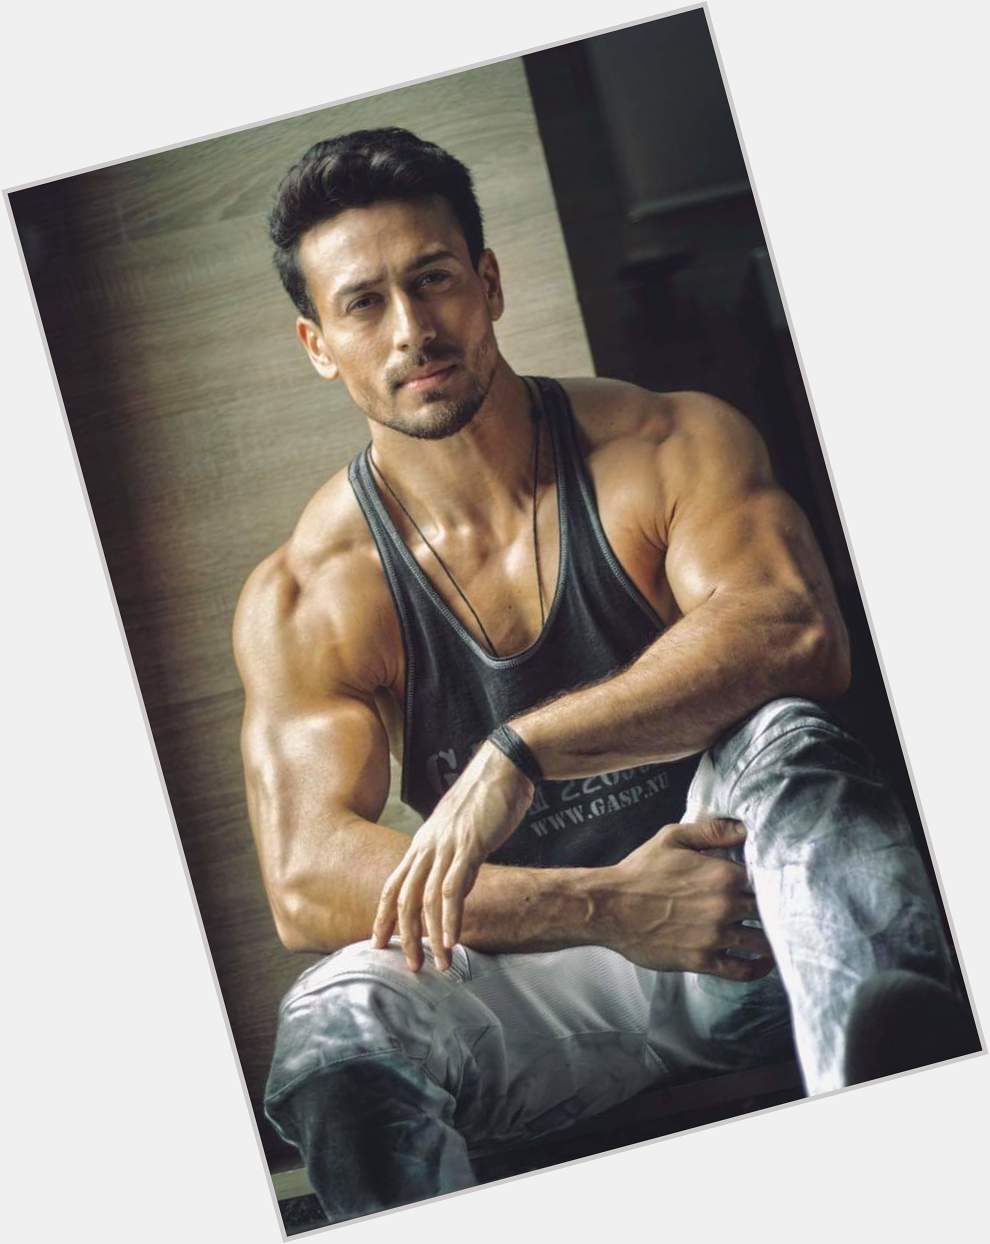 Happy birthday tiger shroff May Allah always keep you happy And all the happiness in the world 